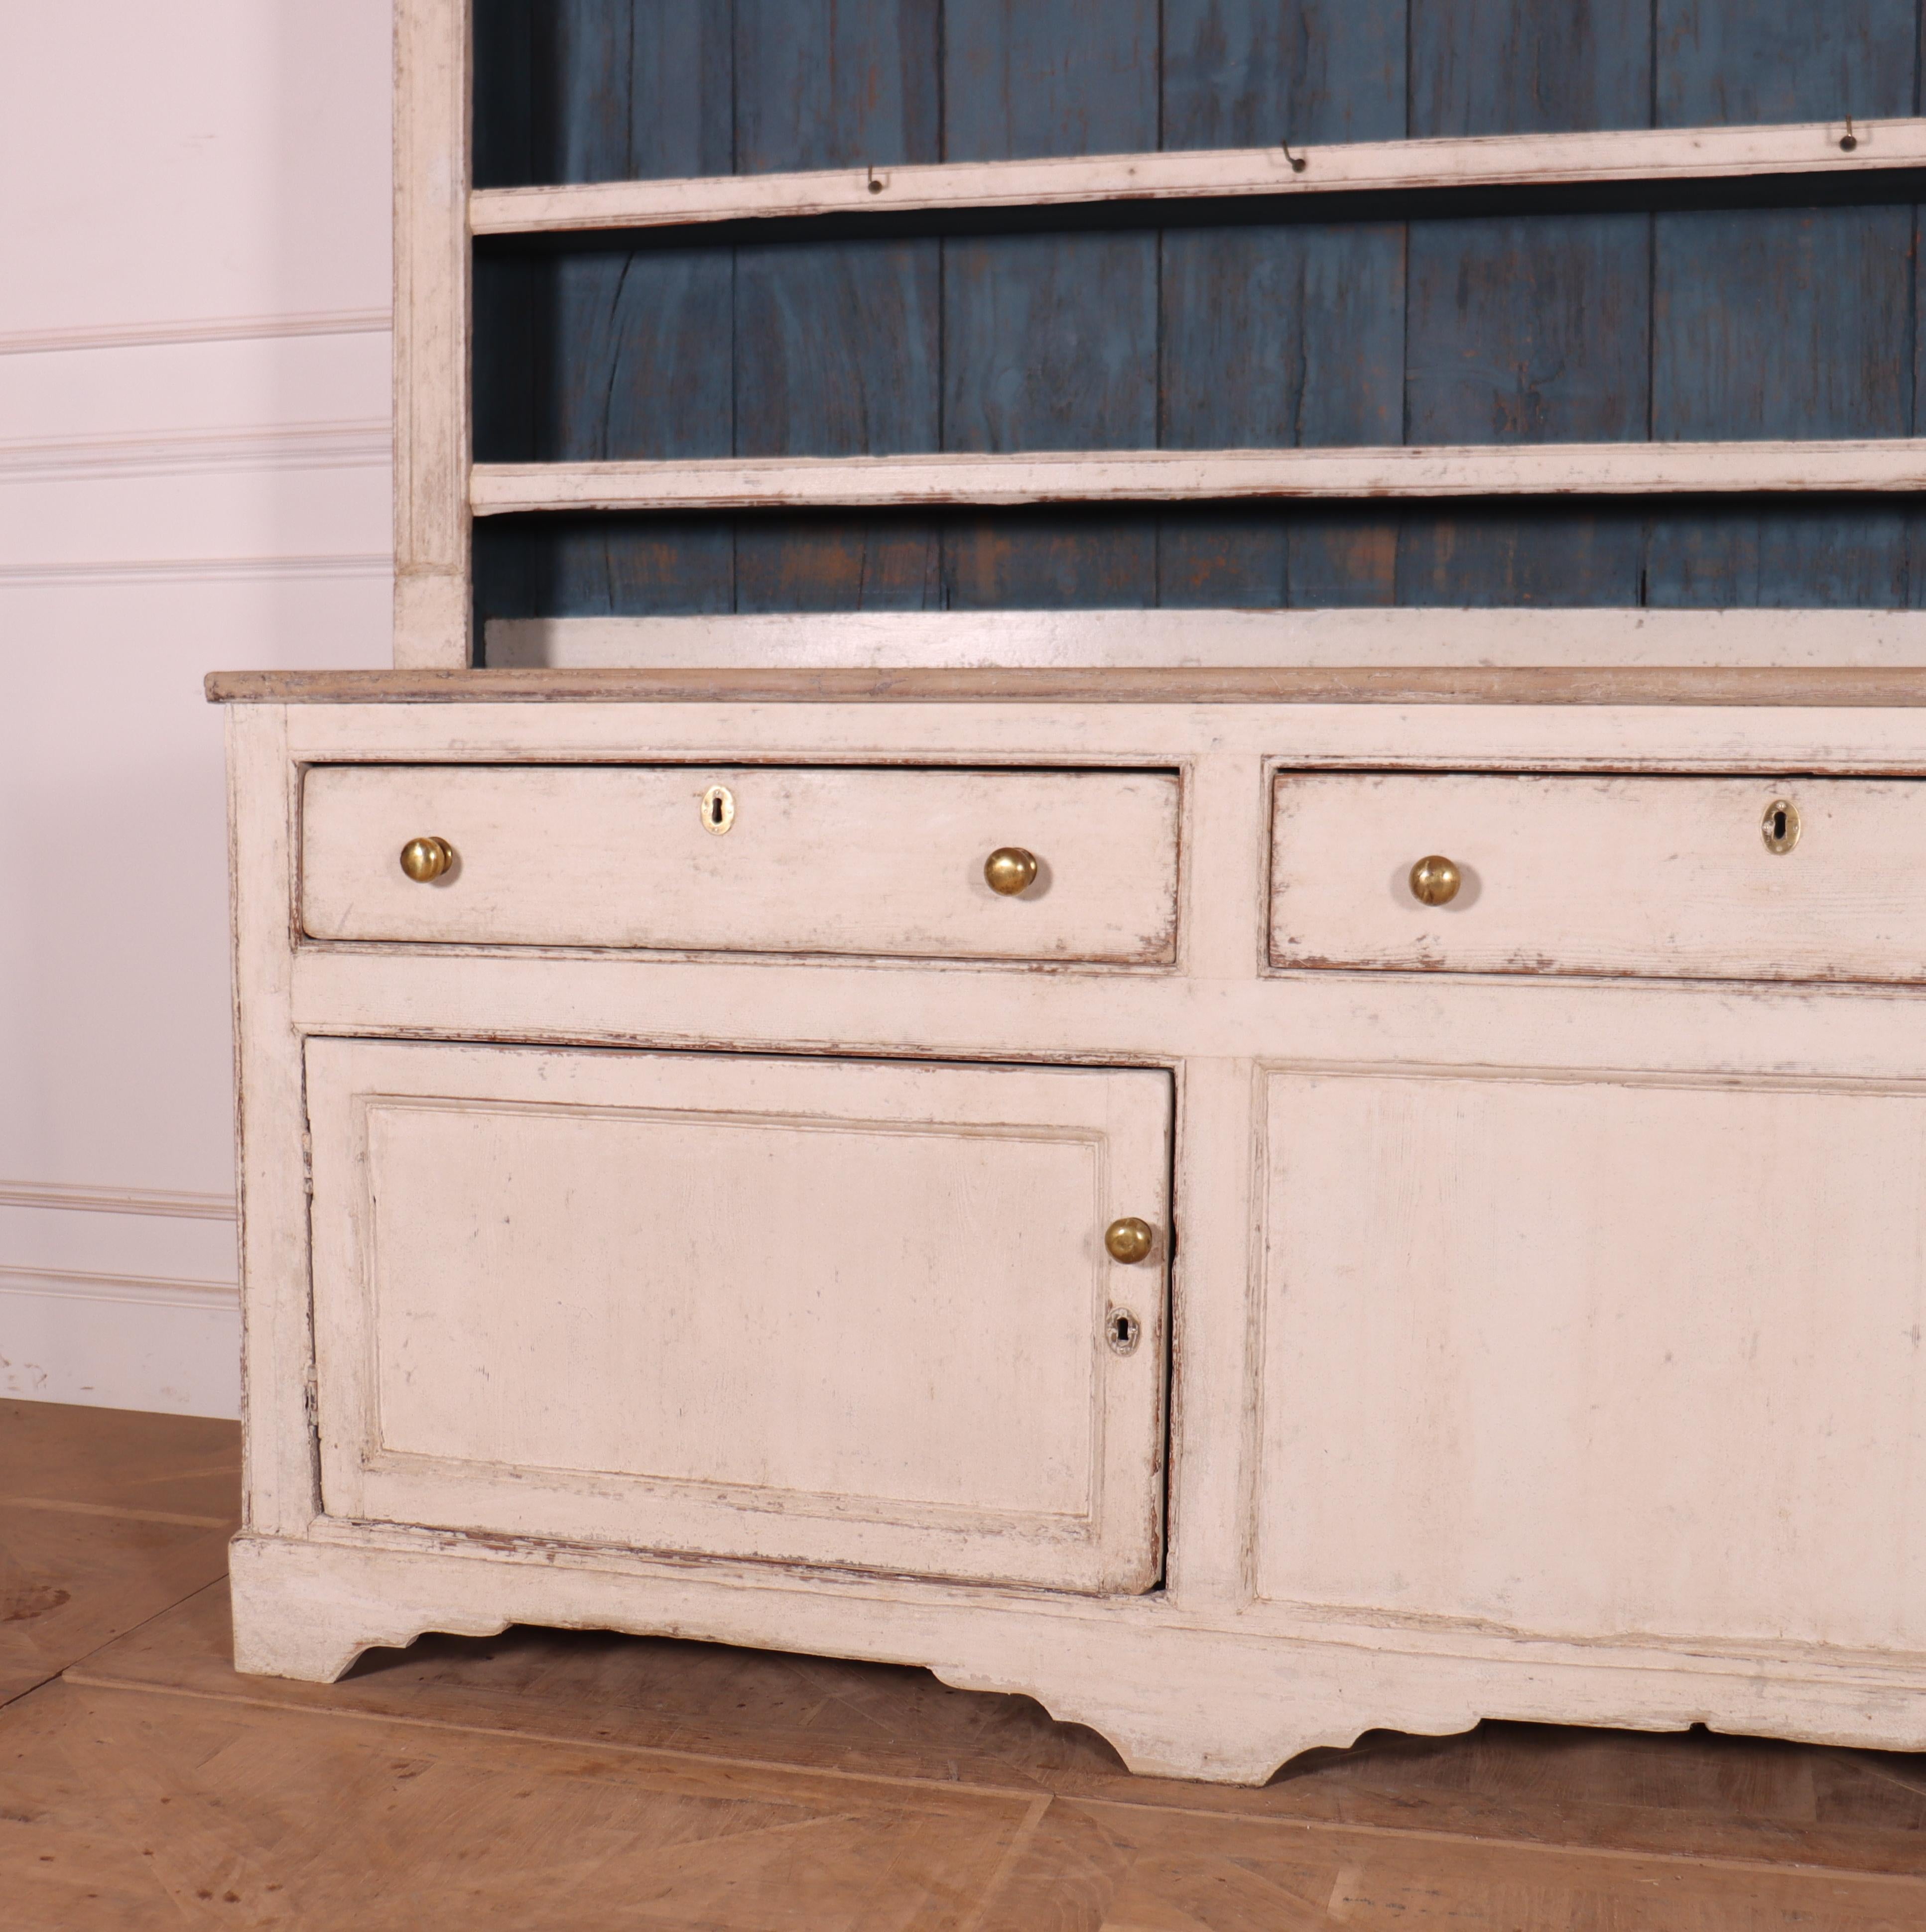 Stunning 18th Century painted pine West Country kitchen dresser. 1790.

Shelf depth is 16cm.

Dimensions
108 inches (274 cms) Wide
22.5 inches (57 cms) Deep
84.5 inches (215 cms) High.